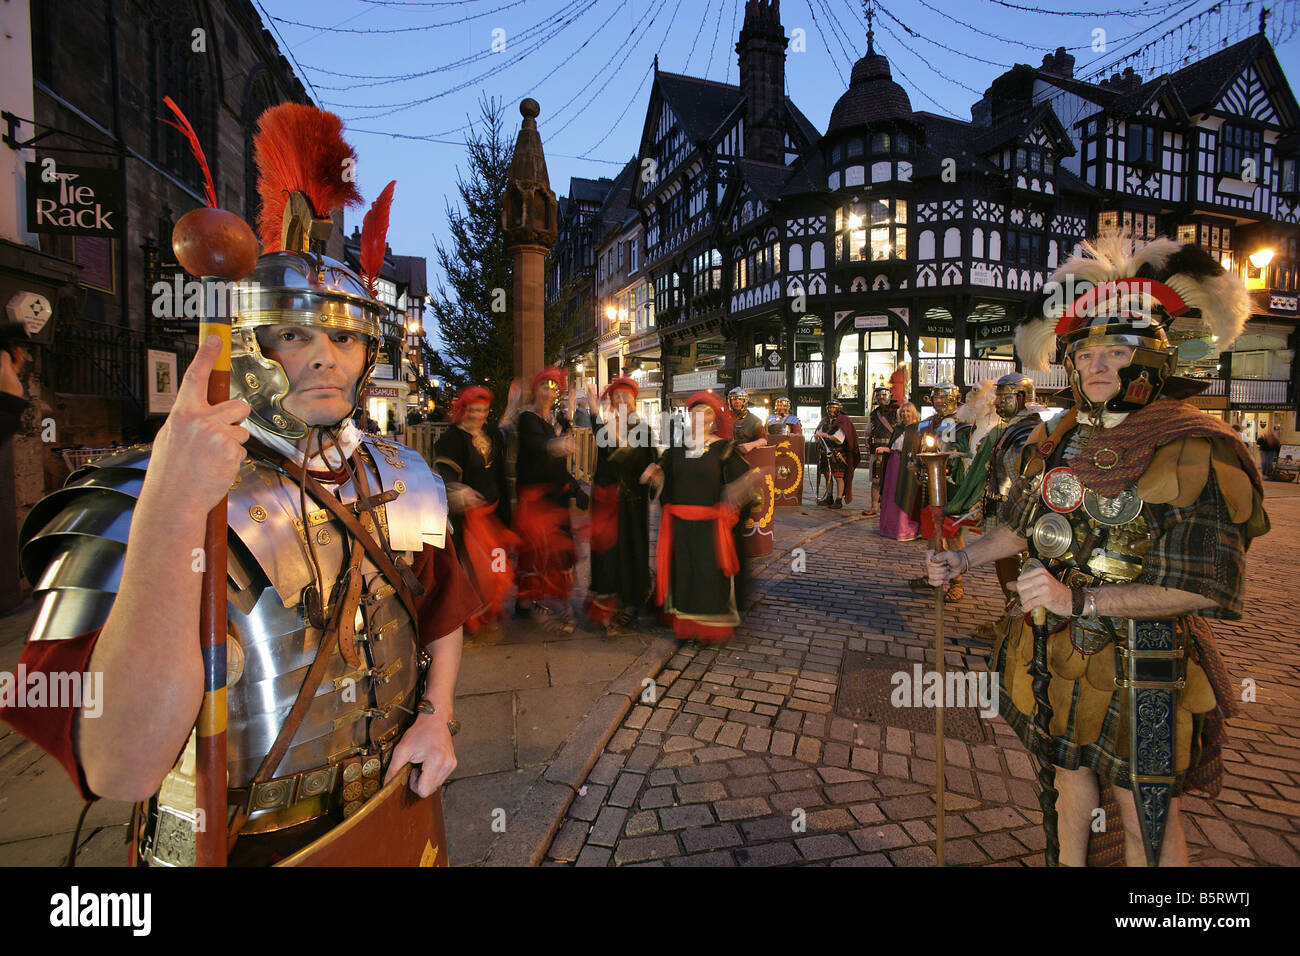 City of Chester, England. Roman Tours conducting a torchlight Christmas parade Saturnalia re-enactment event in the city centre. Stock Photo